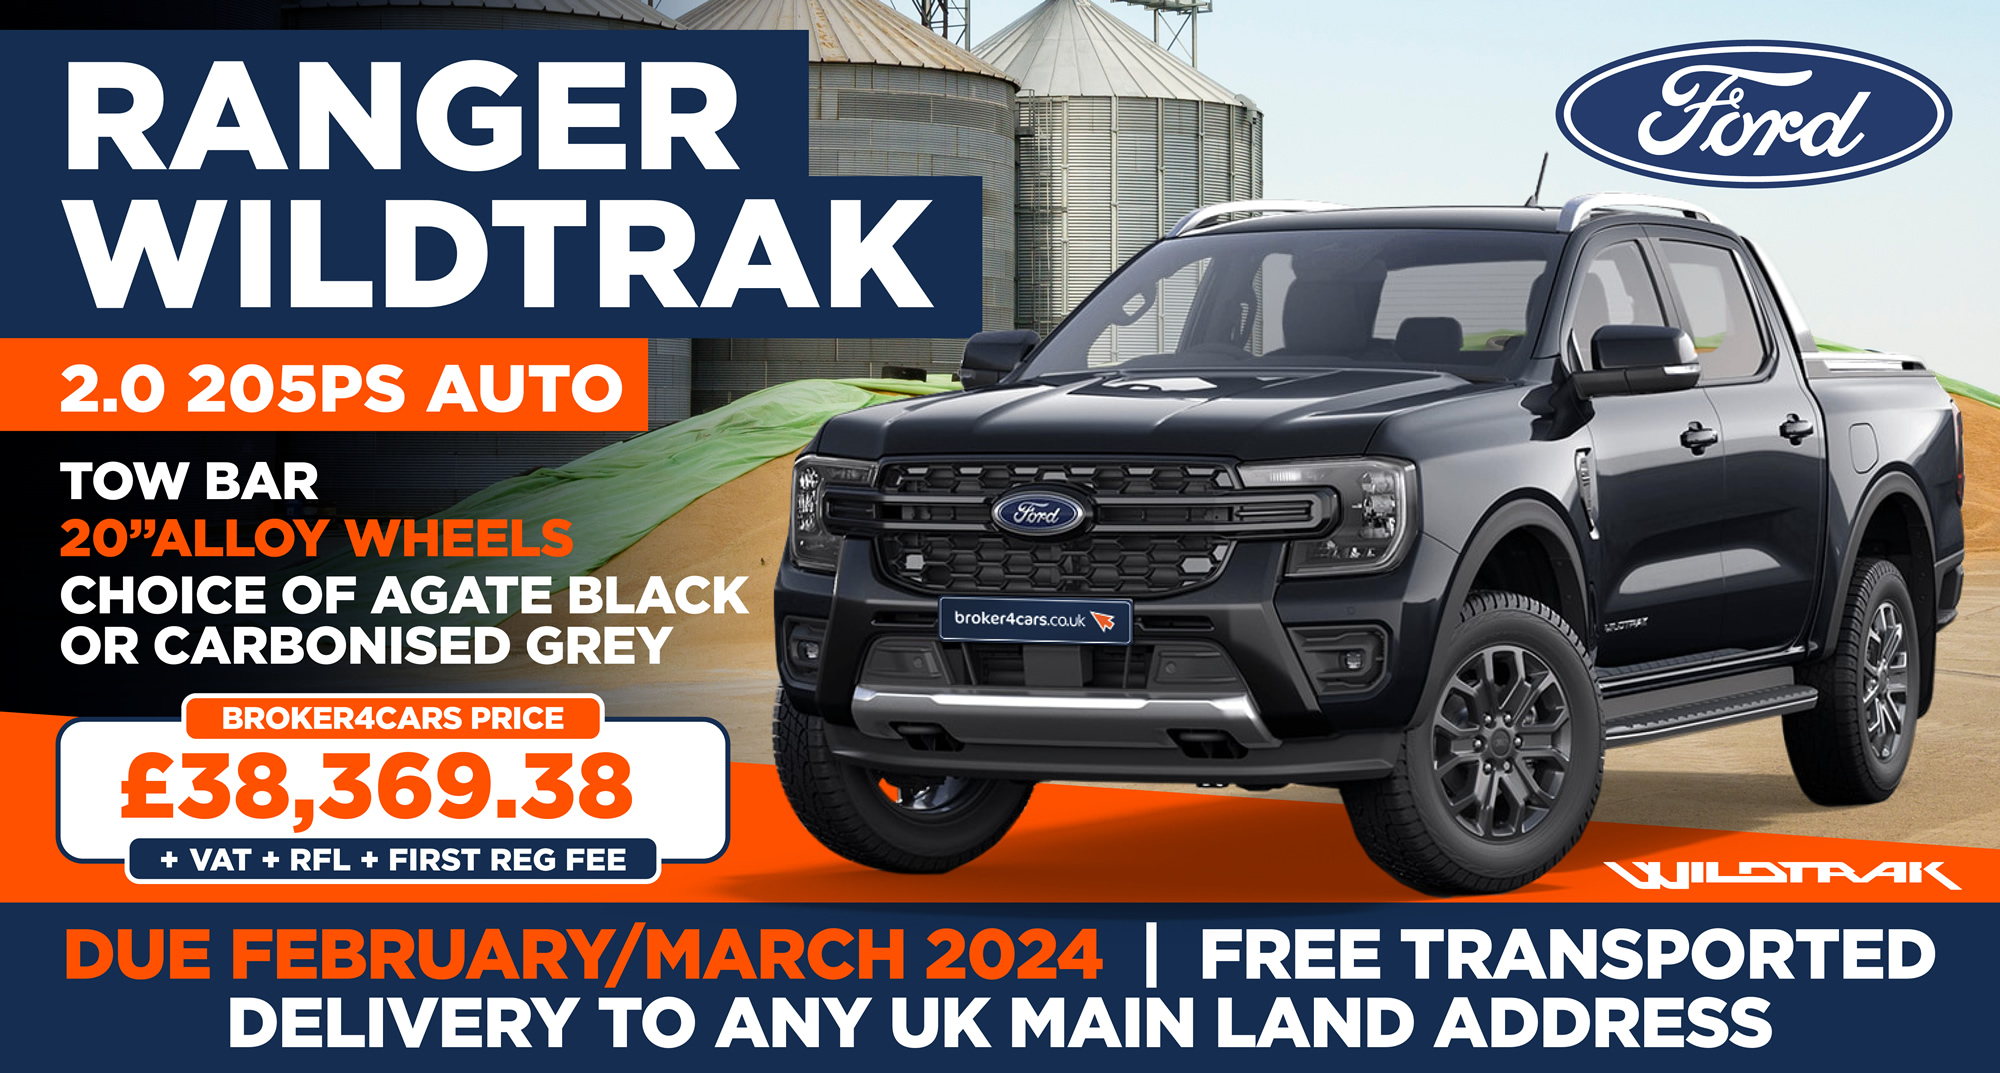 Ranger Wildtrak 2.0 205PS AutoTow Bar, 20 Inch Alloy Wheels, Choice of Agate Black or Carbonised Grey